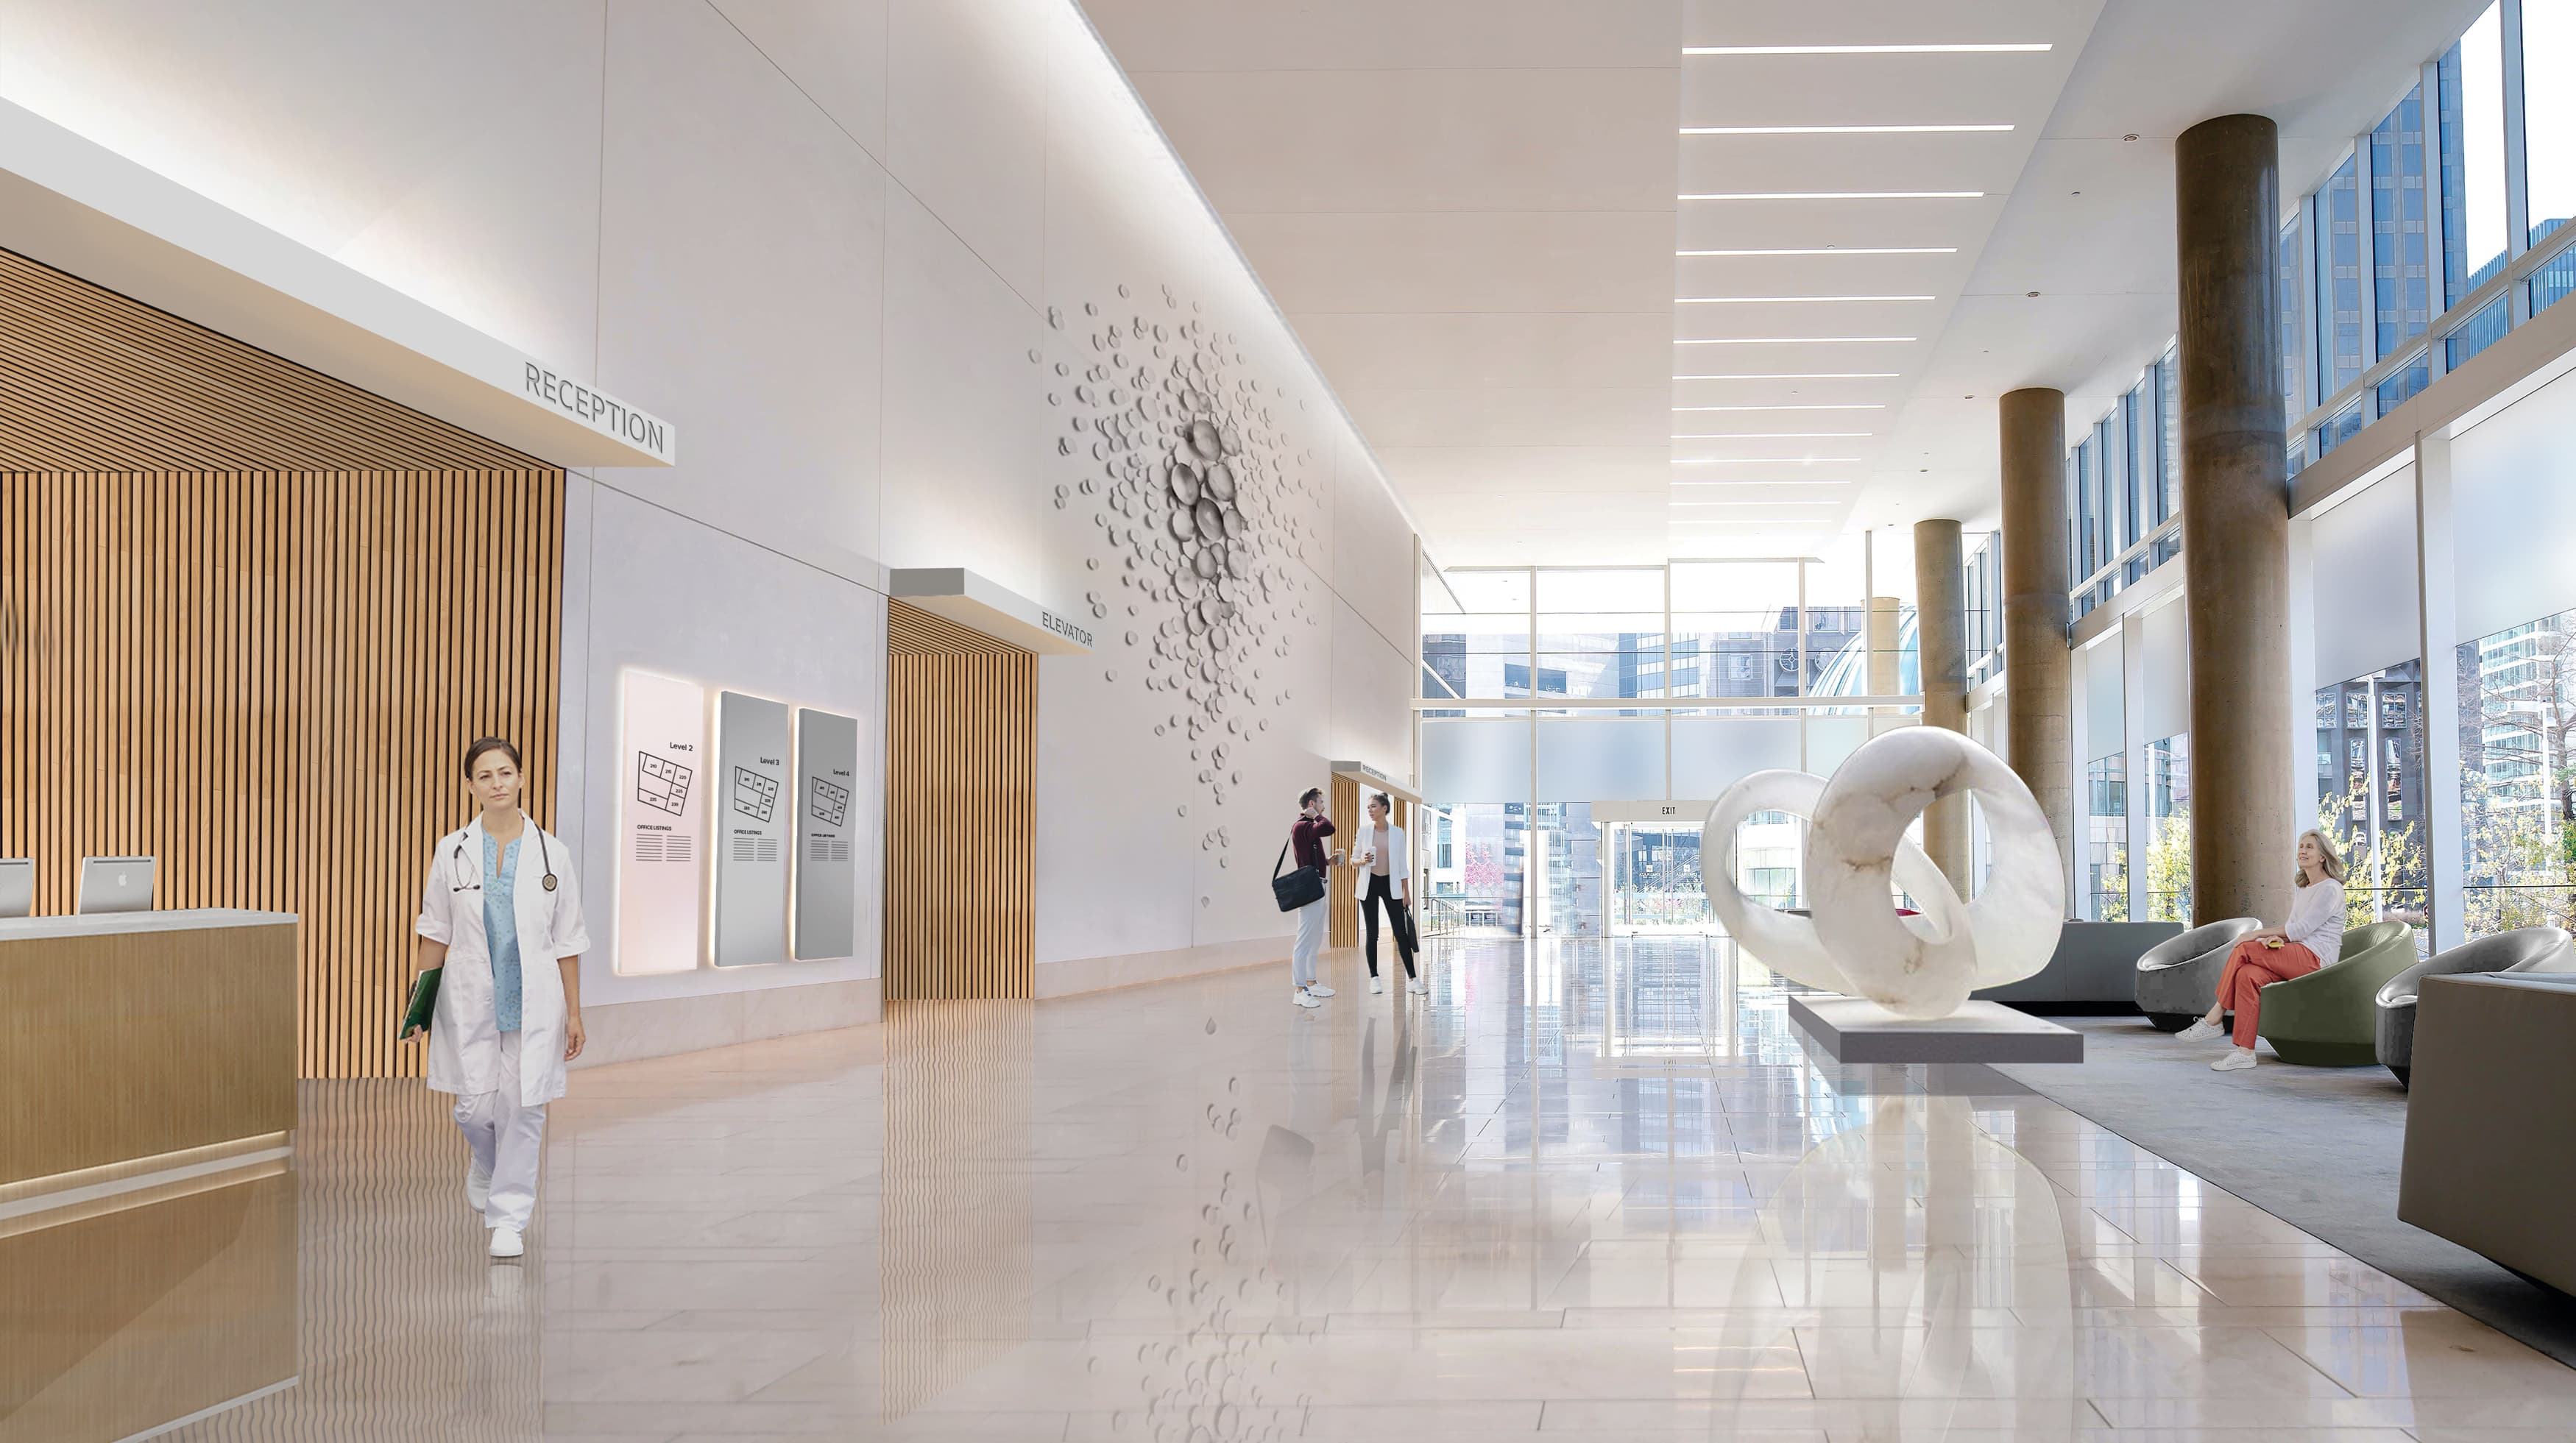 The Patient Experience enhanced by environmental graphics, placemaking & wayfinding seamlessly layered into the built environment